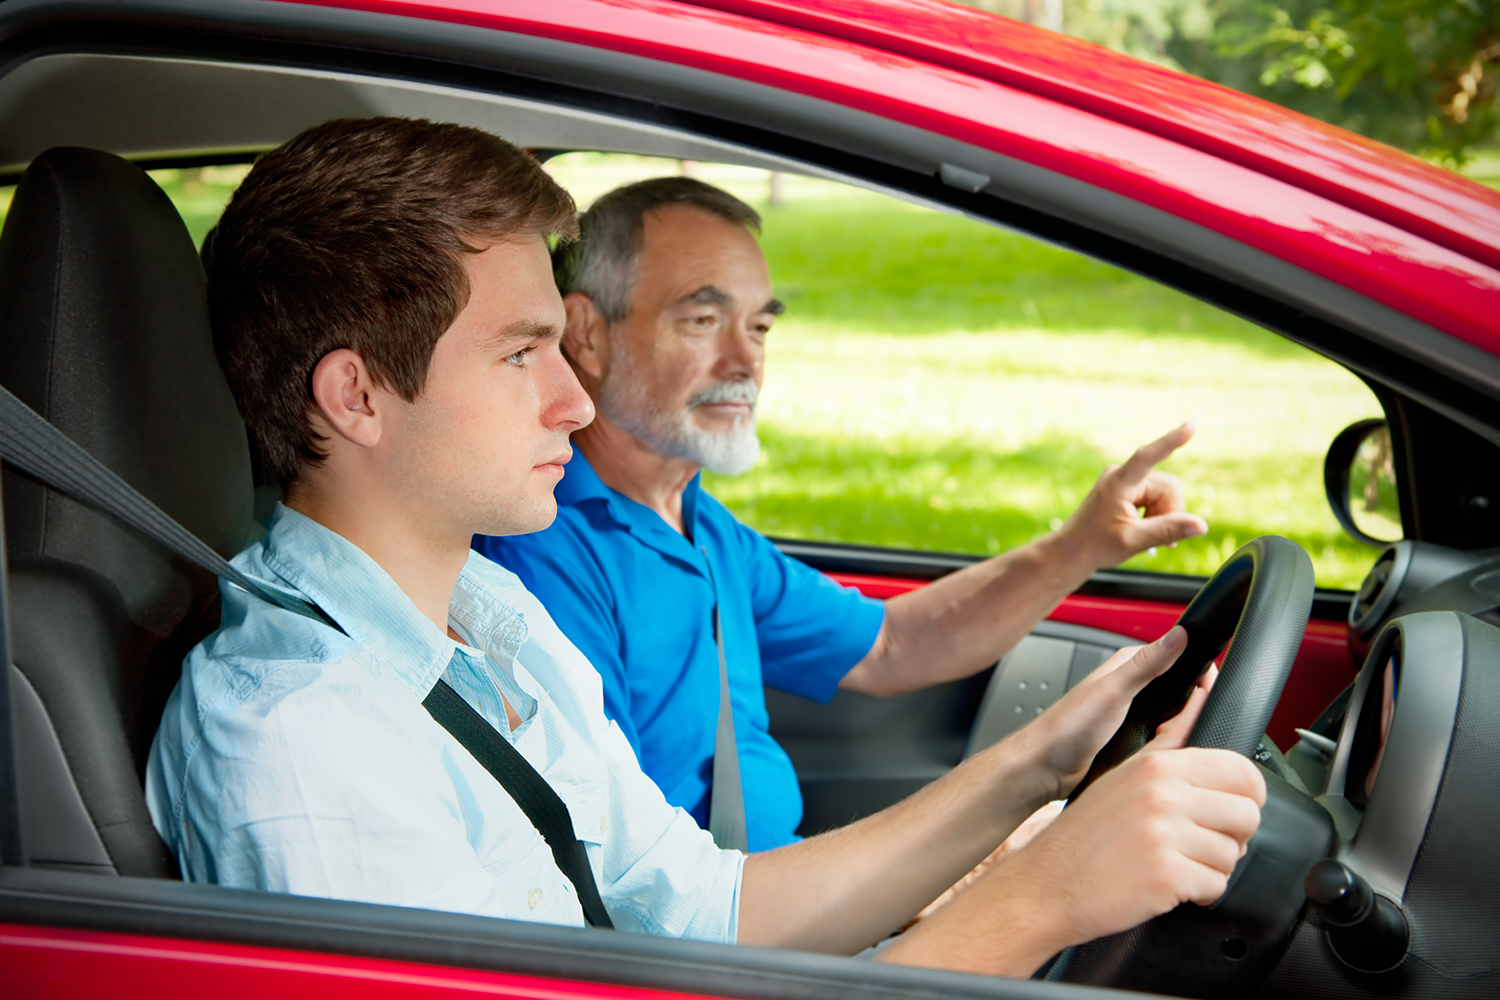 Driving Lessons Salford